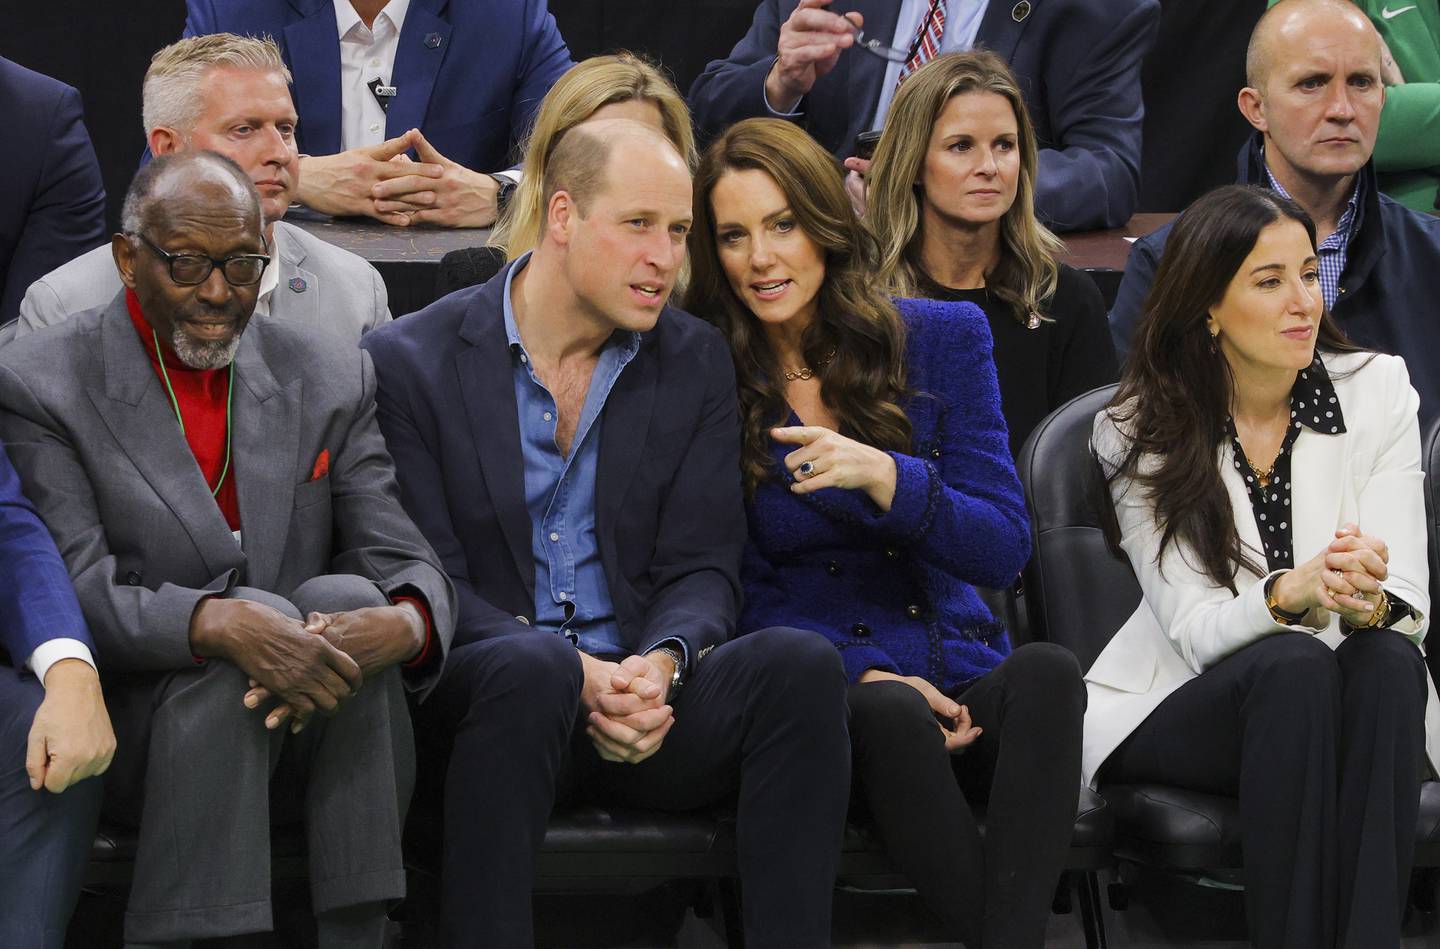 Prince William and wife Kate take in an NBA game between the Boston Celtics and the Miami Heat. AP